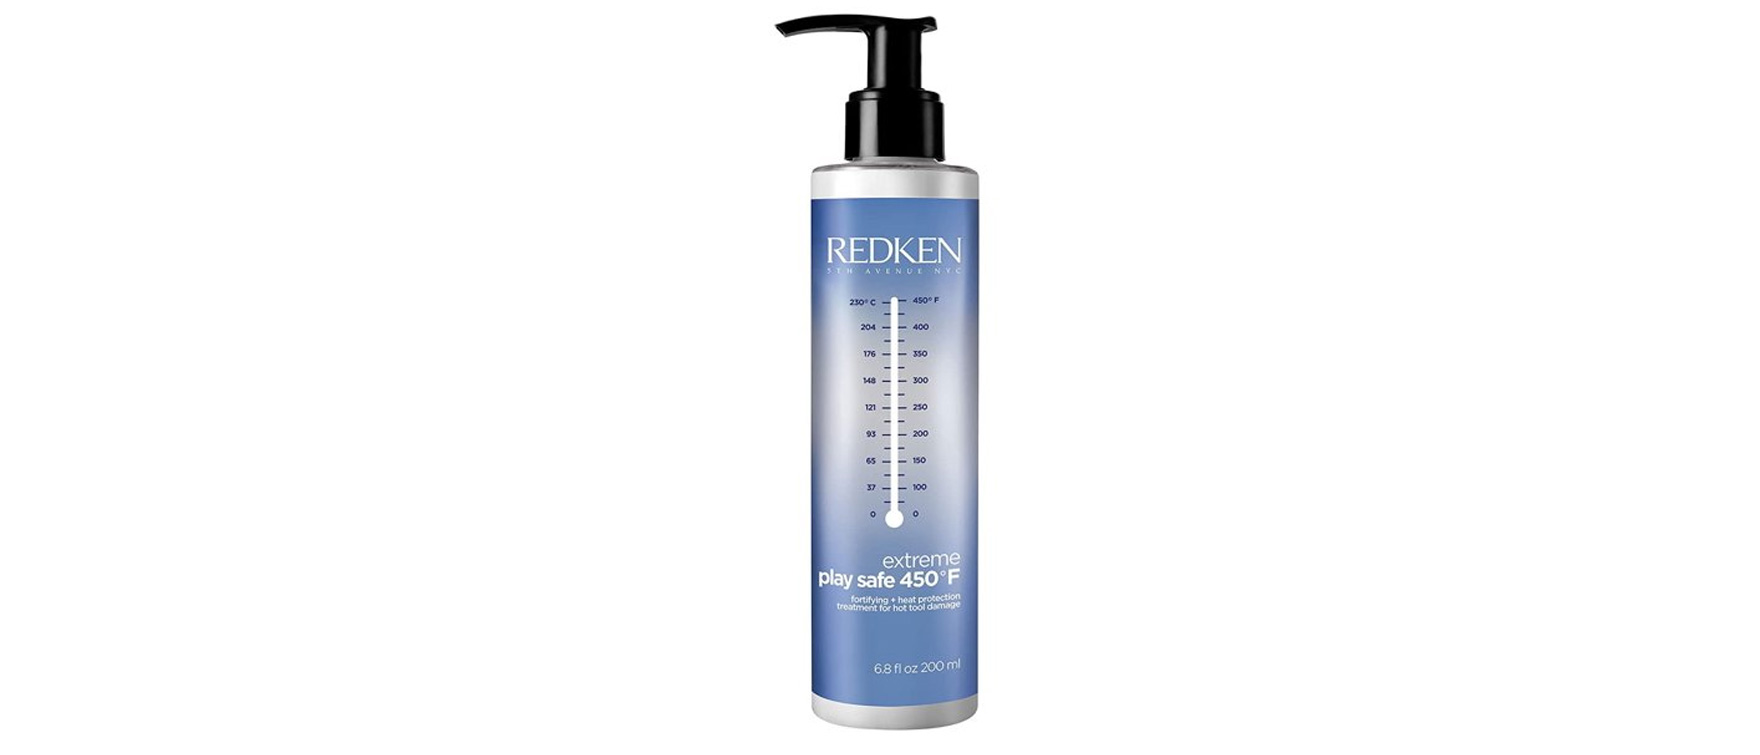 7. Redken Extreme Play Safe Heat Protection and Damage Repair Treatment